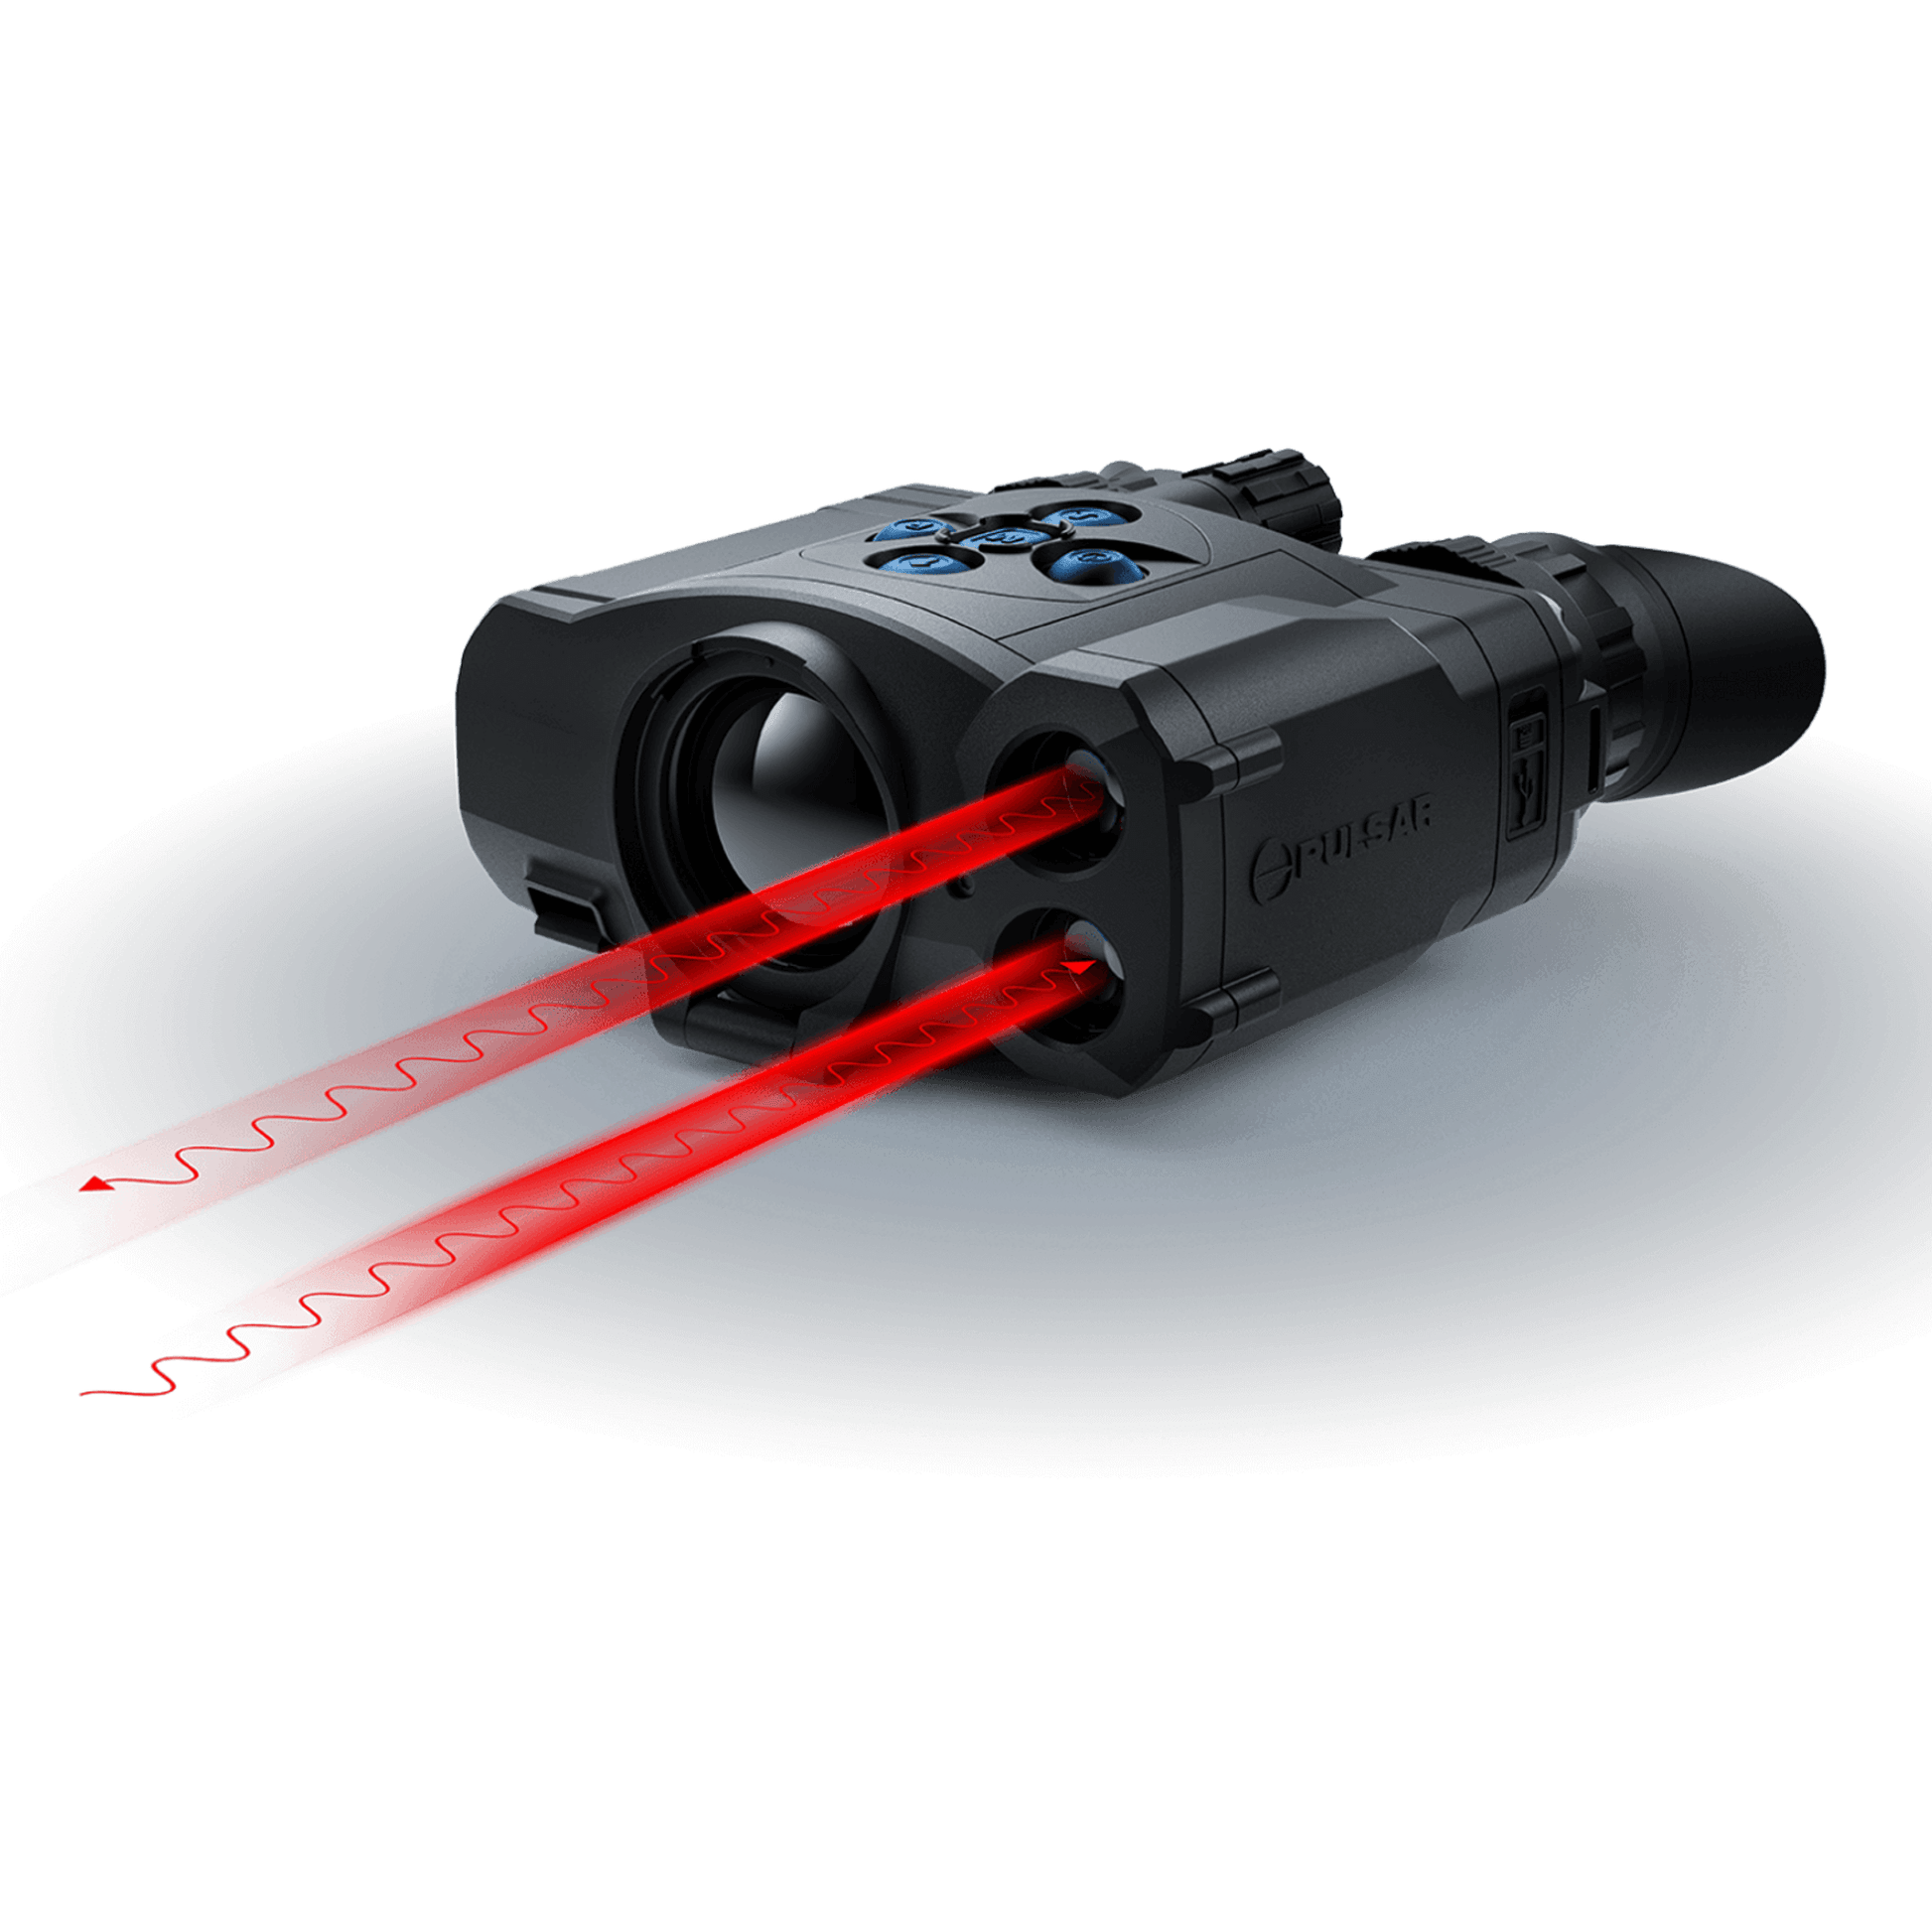 Front View with laser rangefinder - Cape Thermal Pulsar Accolade 2 LRF XP50 PRO for sale